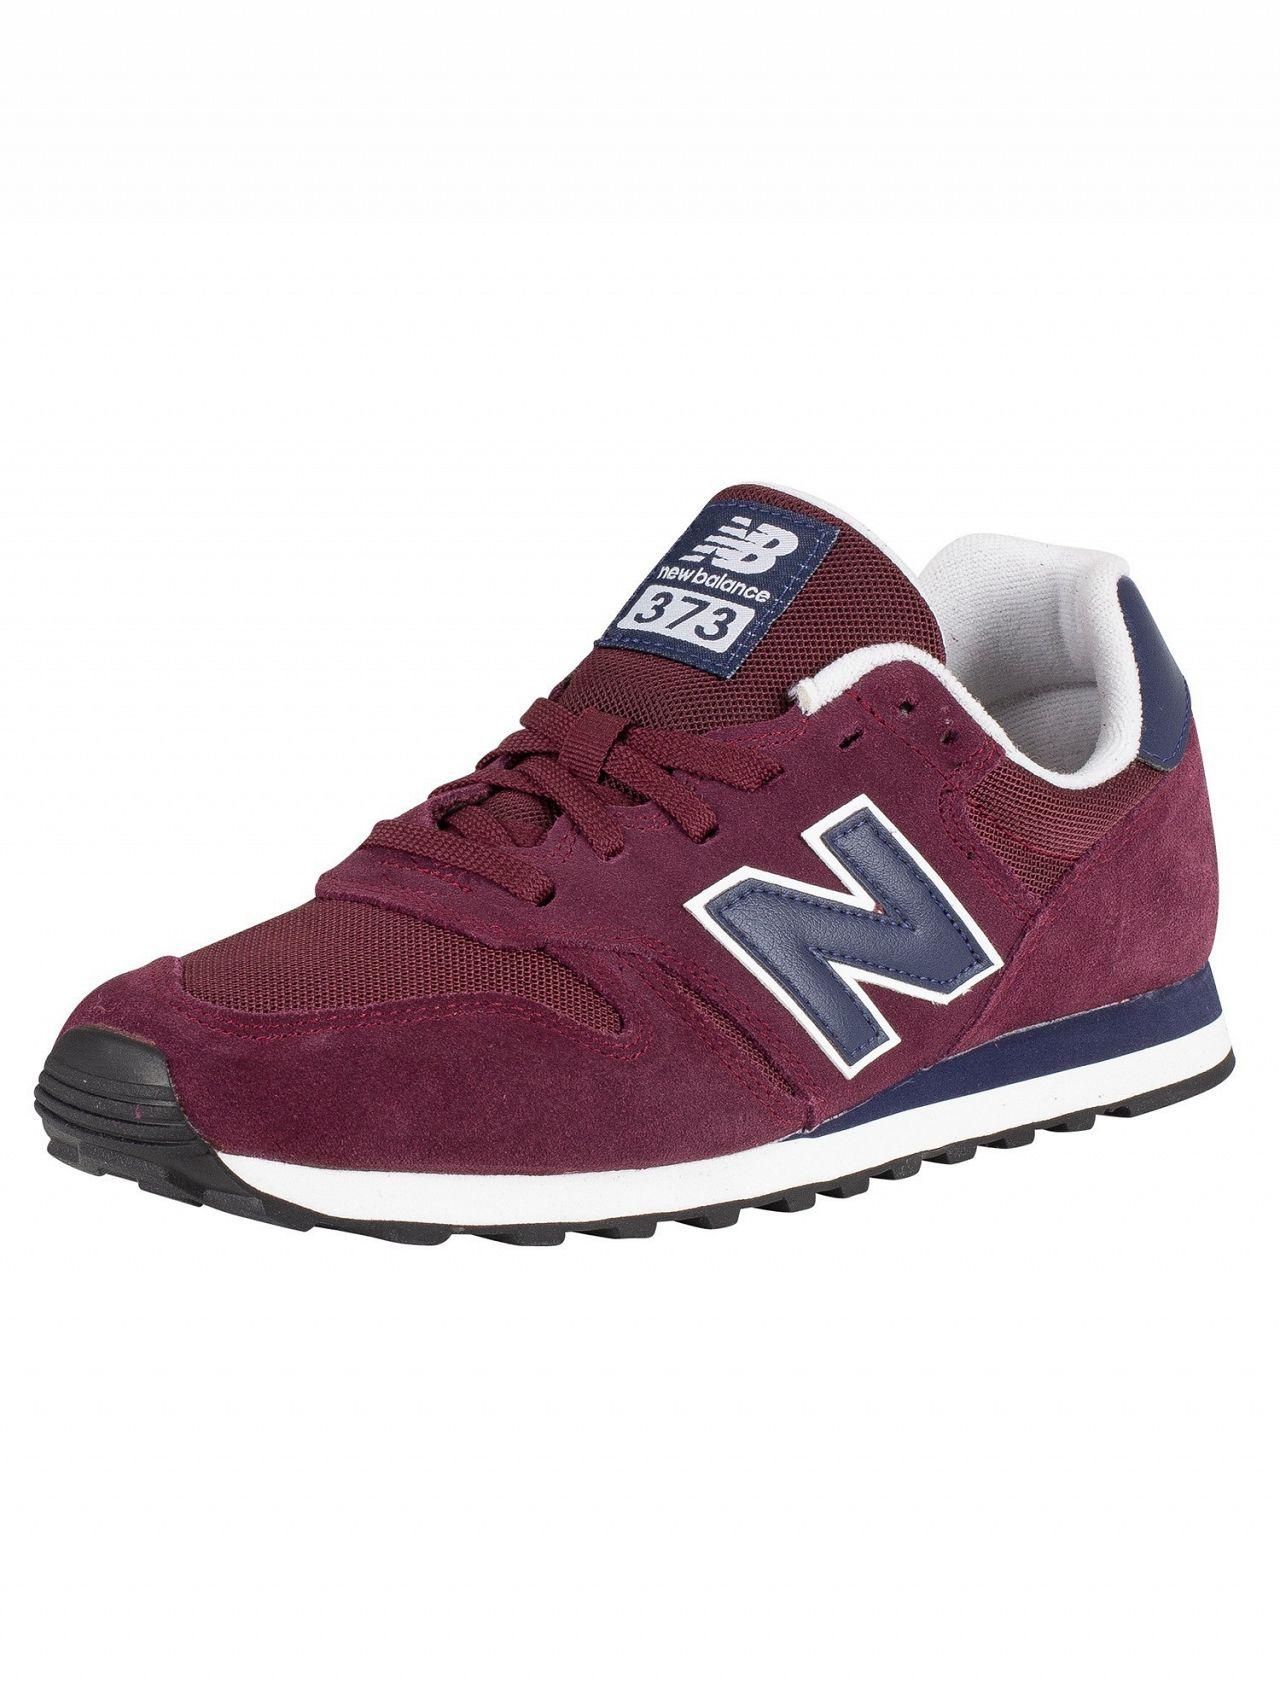 New Balance Burgundy/navy 373 Suede Trainers in Purple for Men - Lyst